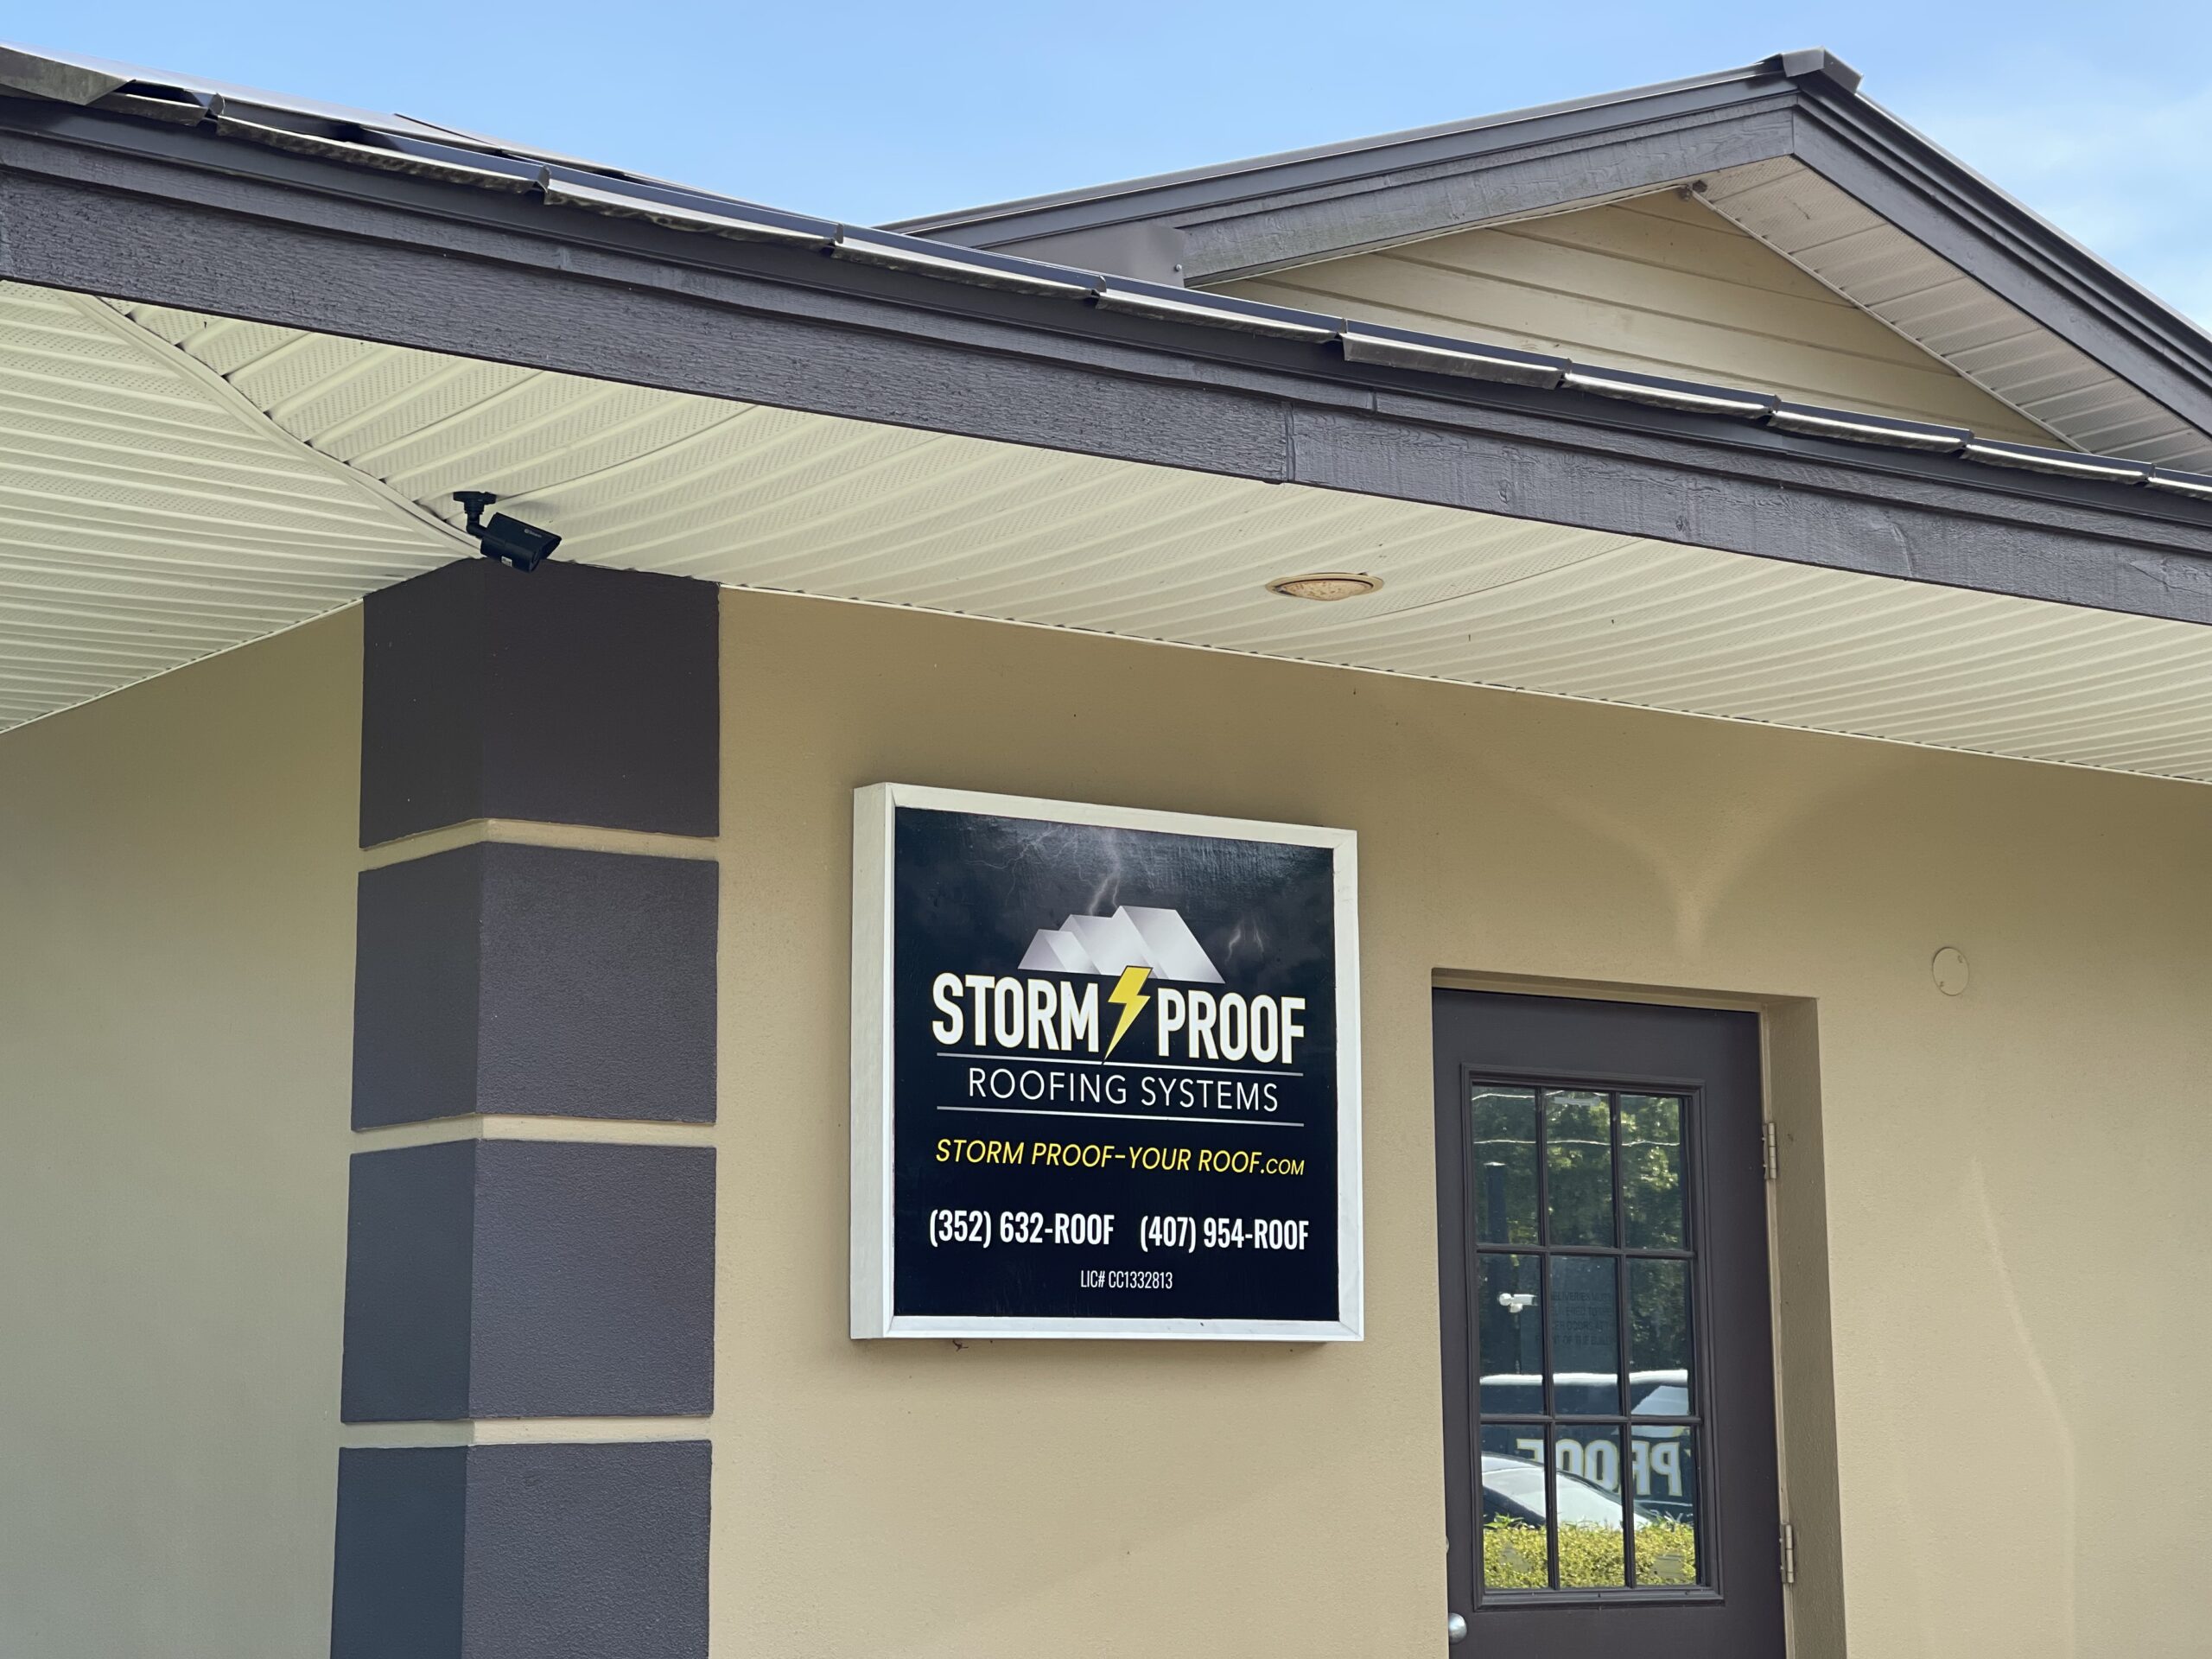 Storm proof Roofing Systems